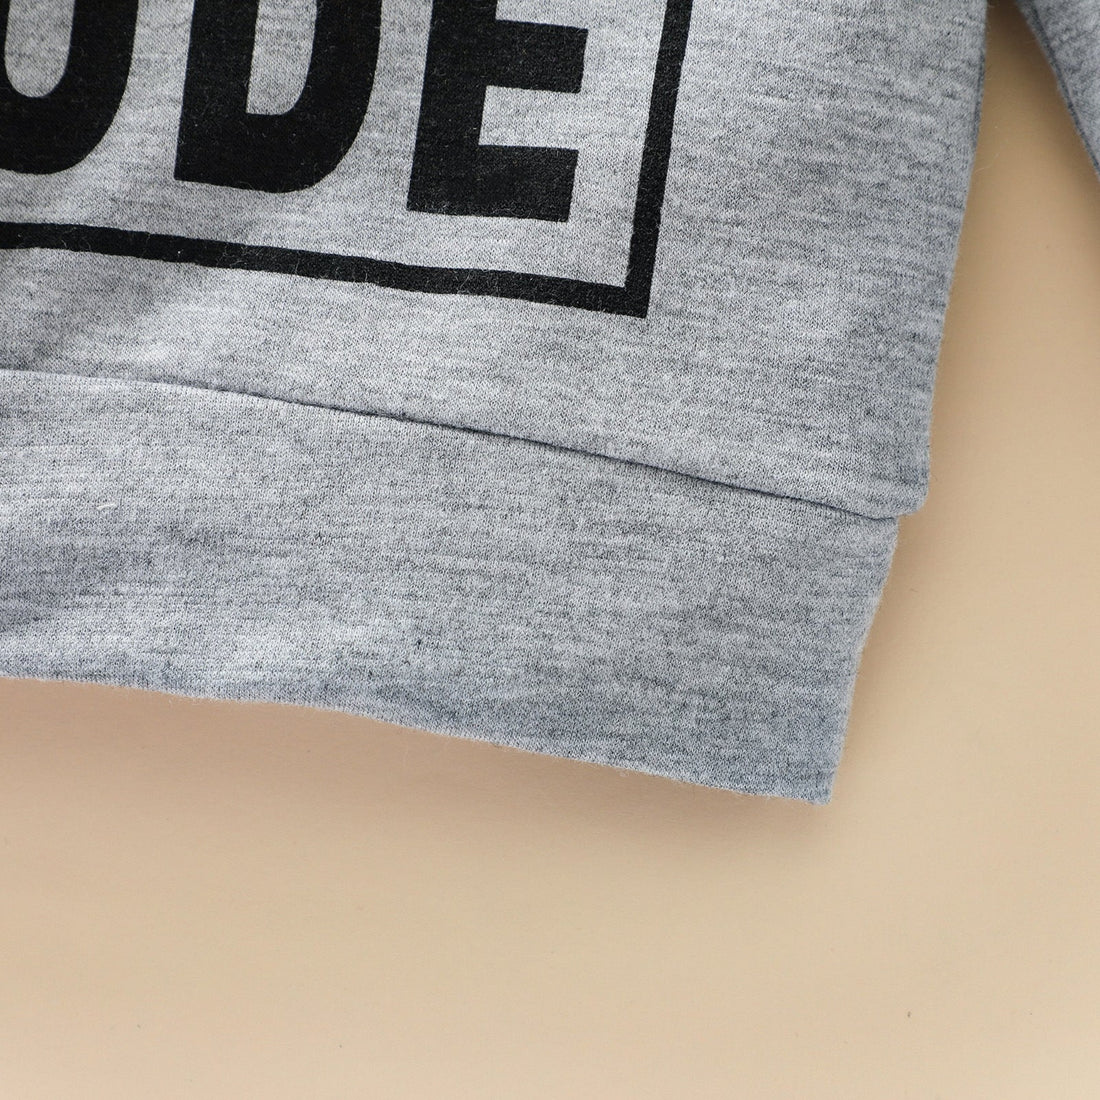 Trendy grey sweatshirt for boys featuring stylish letter graphics.